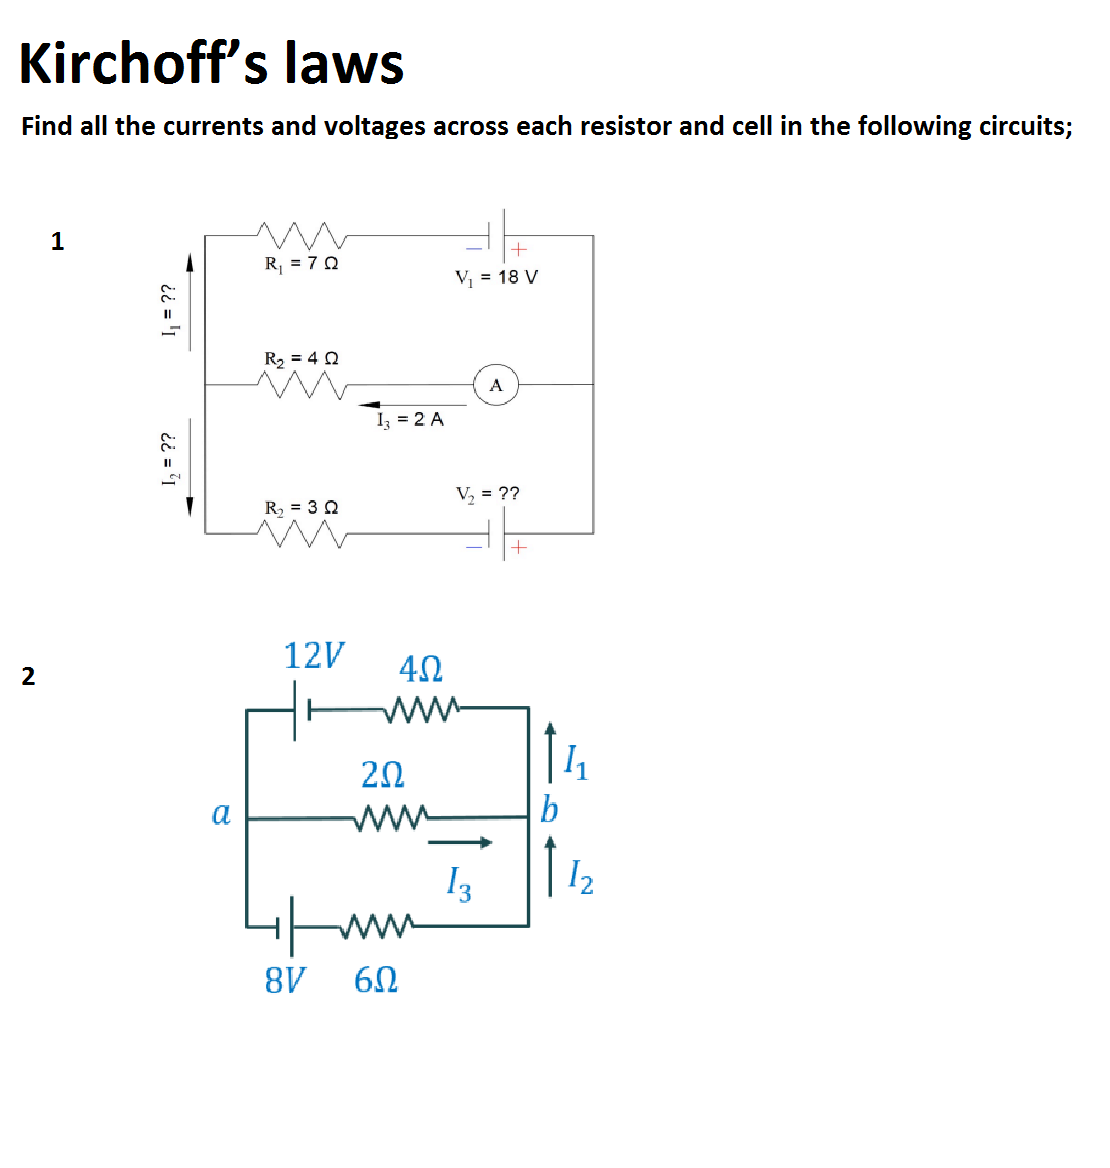 Kirchoff's laws
Find all the currents and voltages across each resistor and cell in the following circuits;
R, = 7 0
V = 18 V
R2 = 4 0
A
I = 2 A
V, = ??
R = 3 2
12V
2
20
a
w
b
13
I2
8V
I = ??
ii = 1
